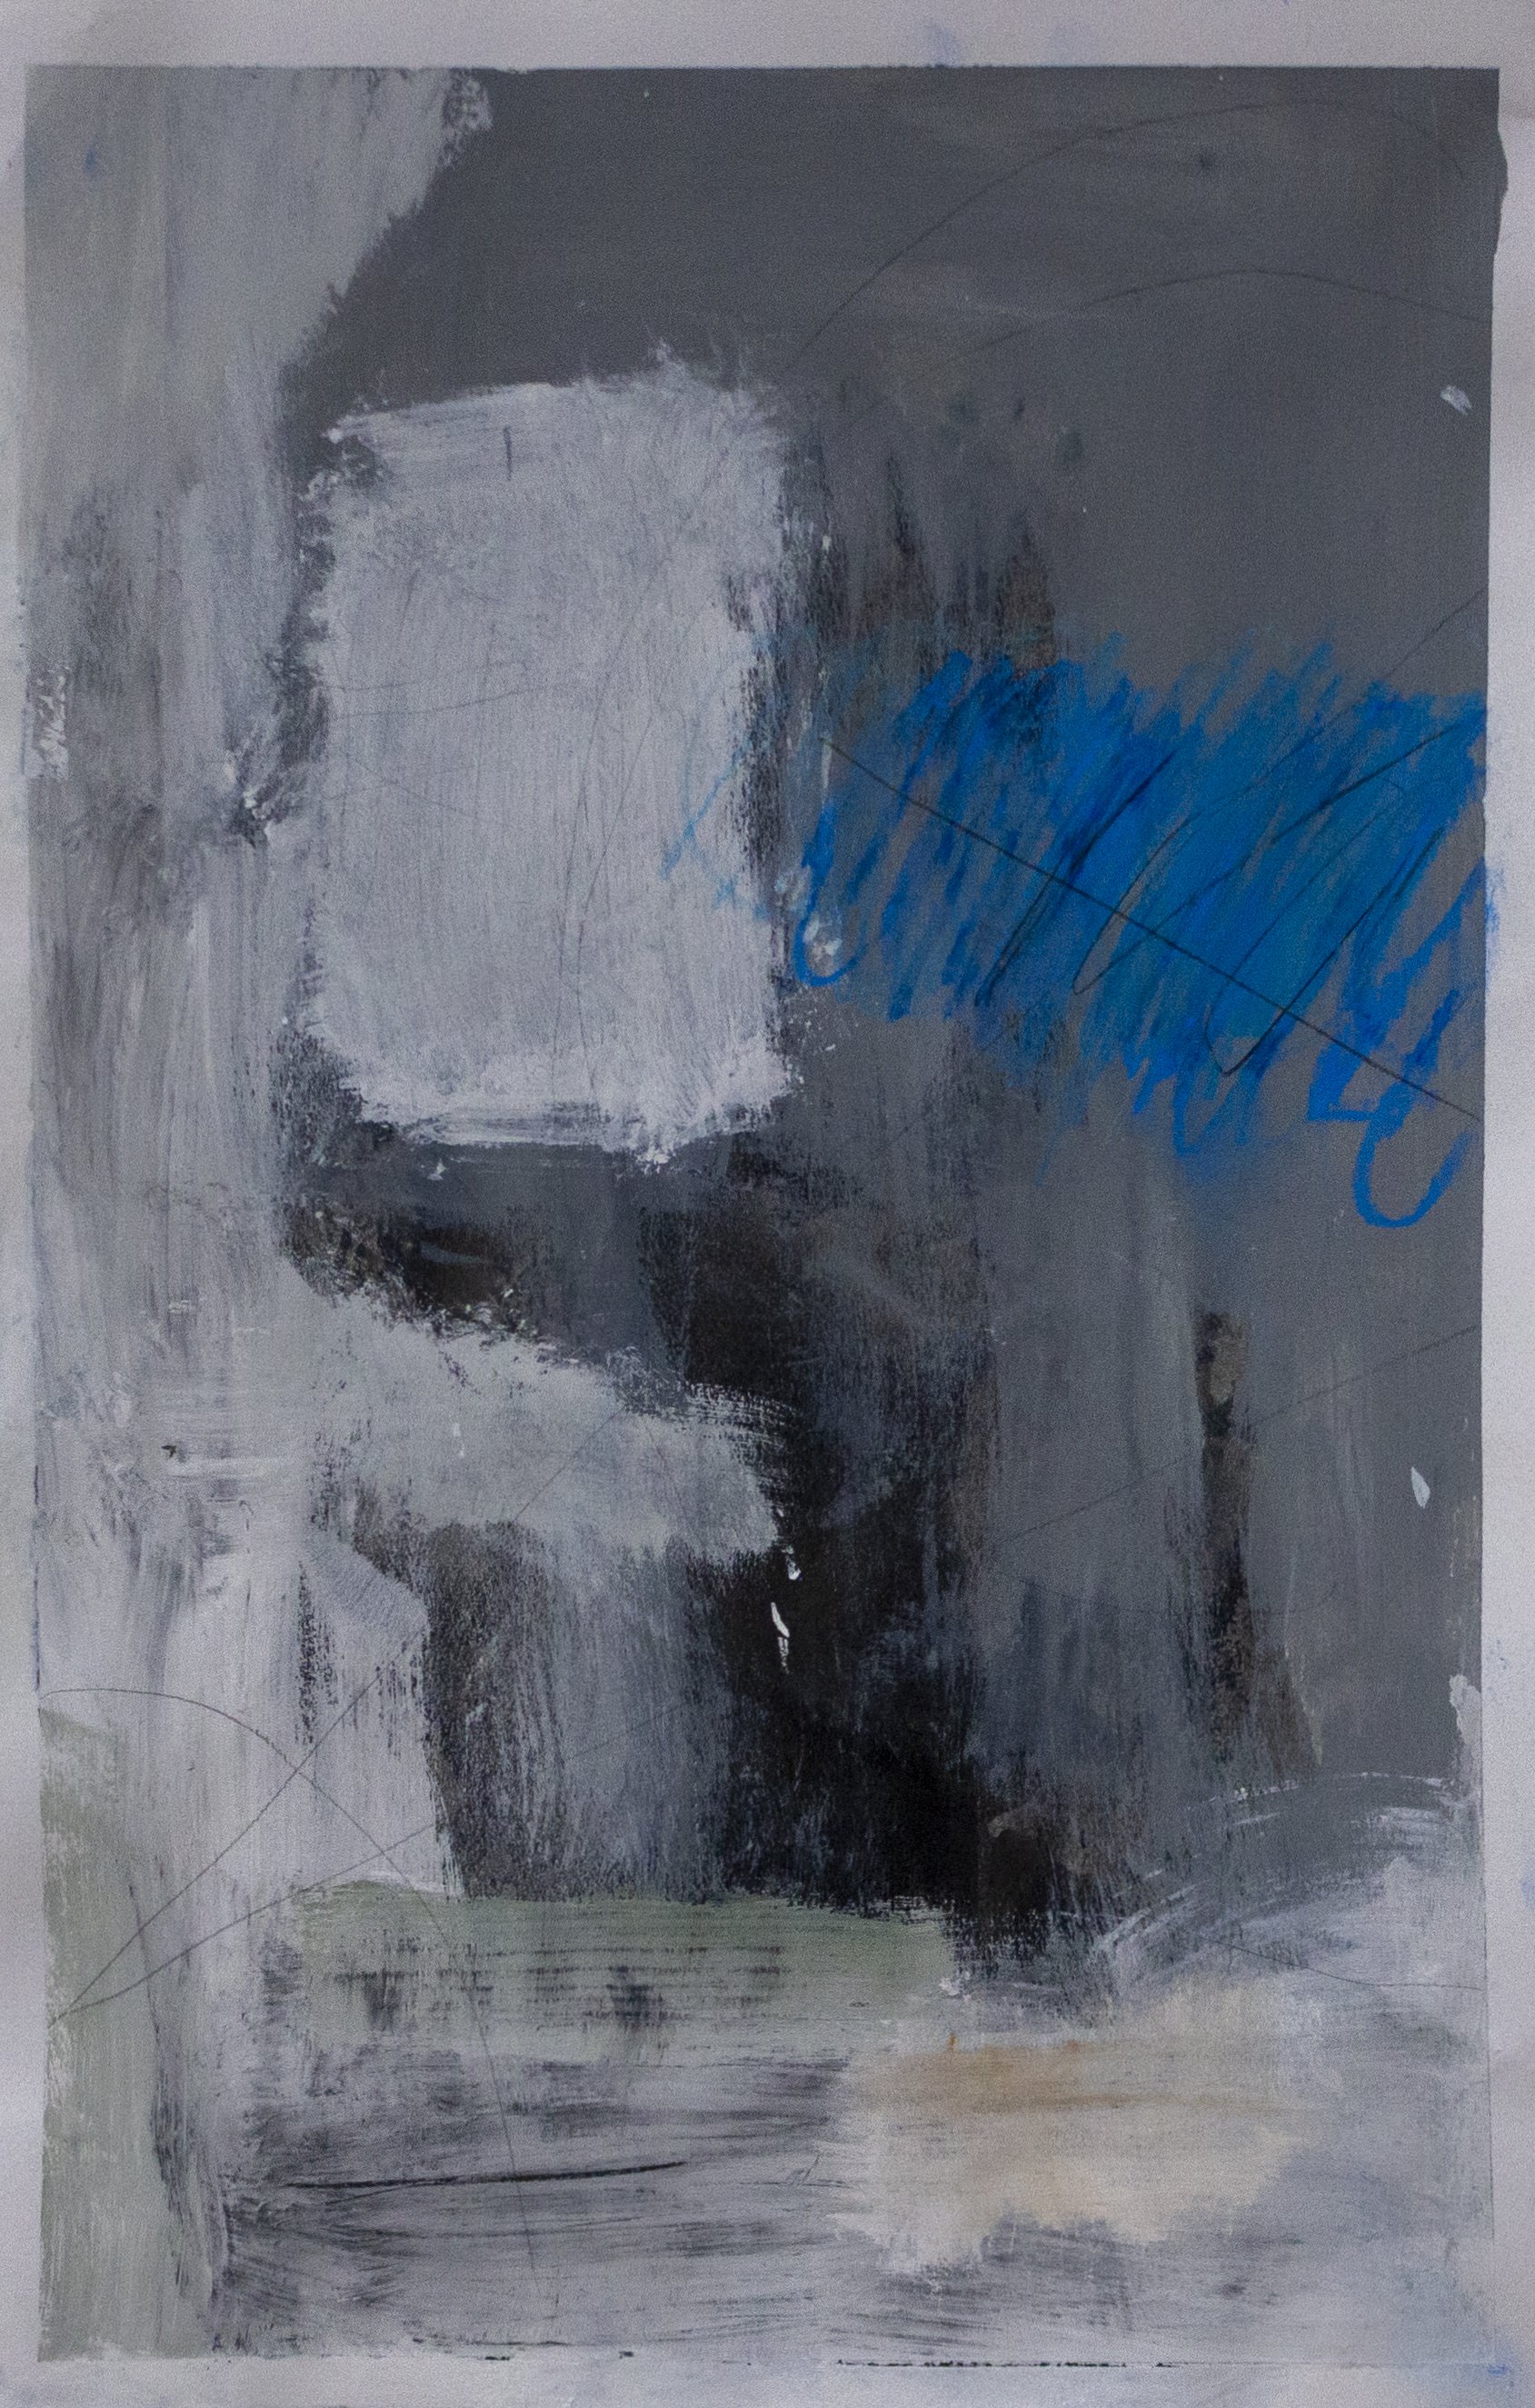   Cold and Bare , 2022  11 x 17 Inches  Acrylic, Ink, Graphite, Pastel, and Crayon on Paper 